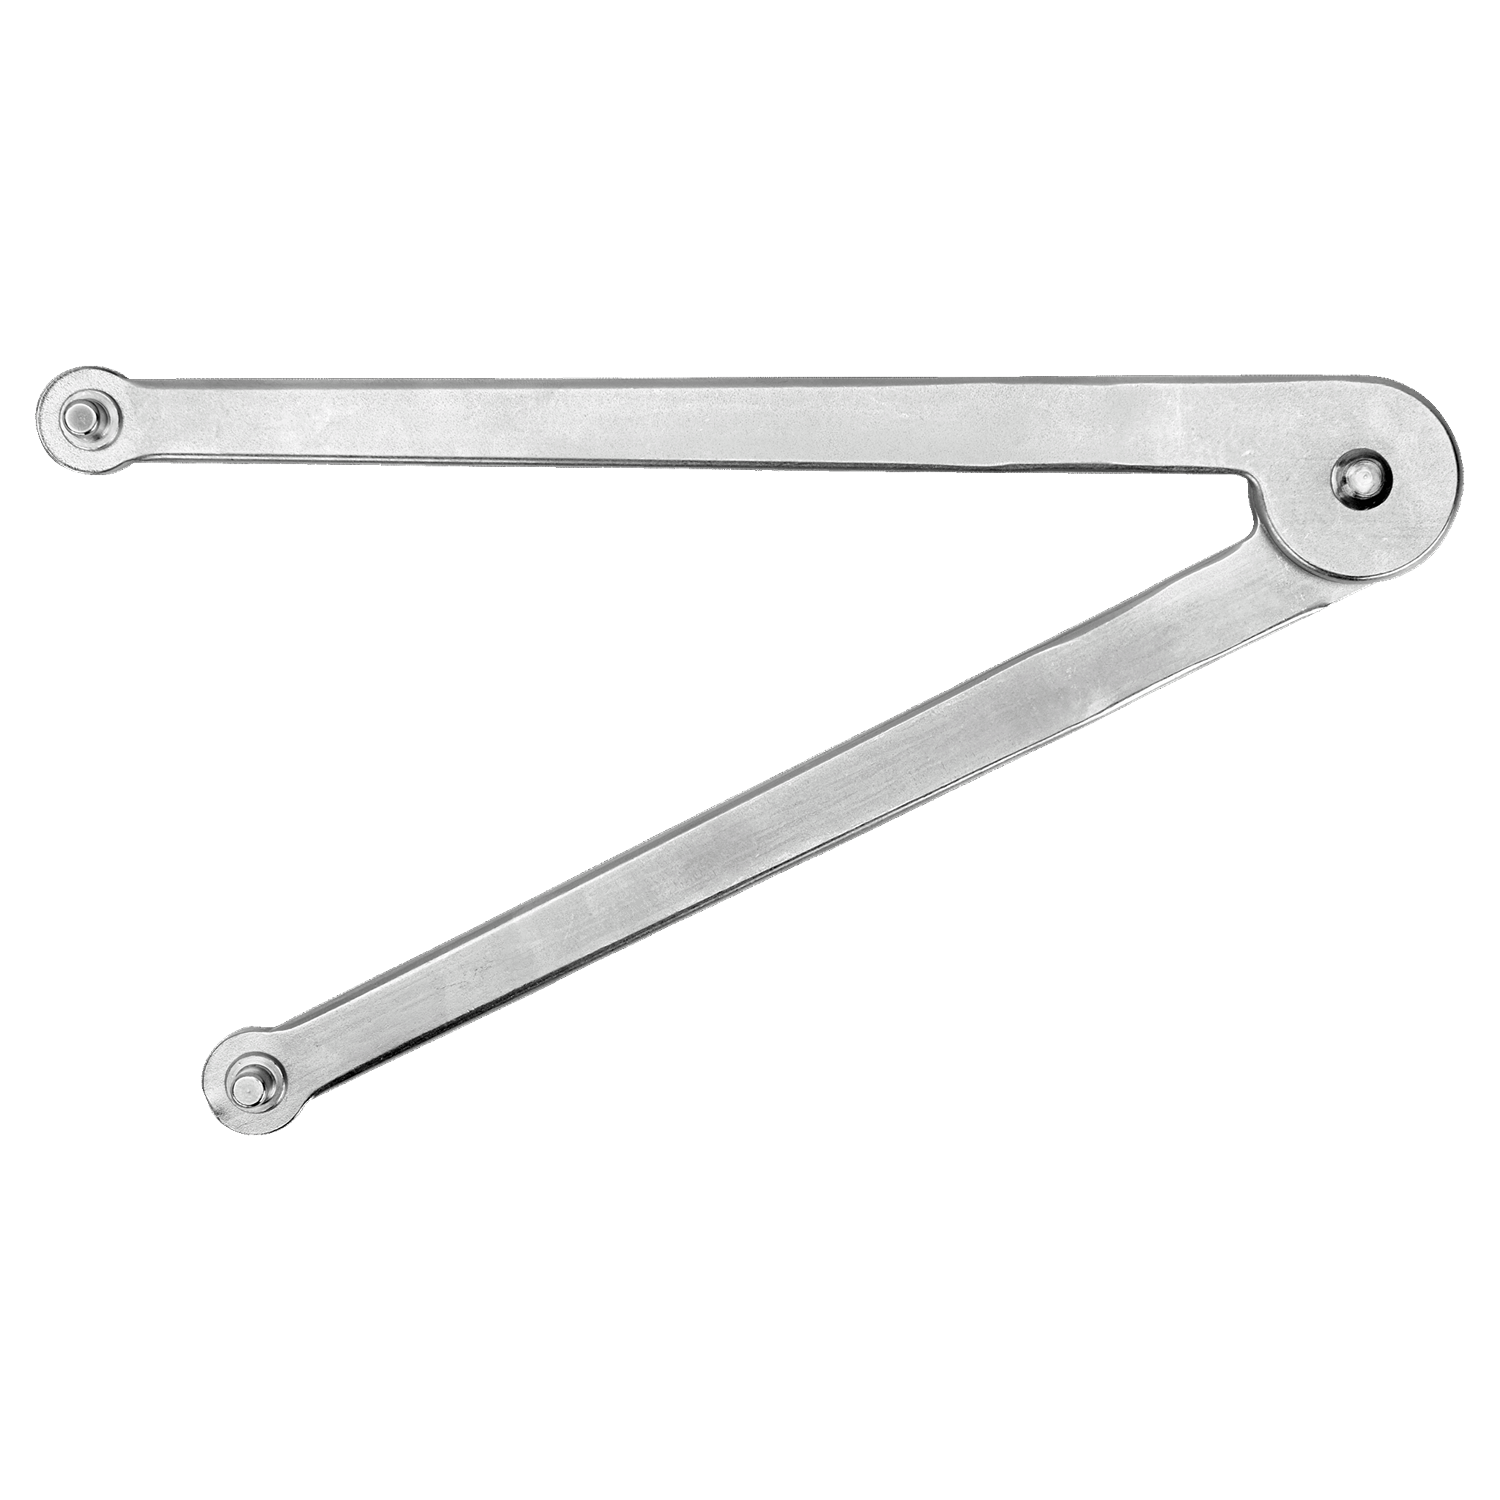 BAHCO 4307 Adjustable Pin Wrench with Chrome Finish - Premium Adjustable Pin Wrench from BAHCO - Shop now at Yew Aik.